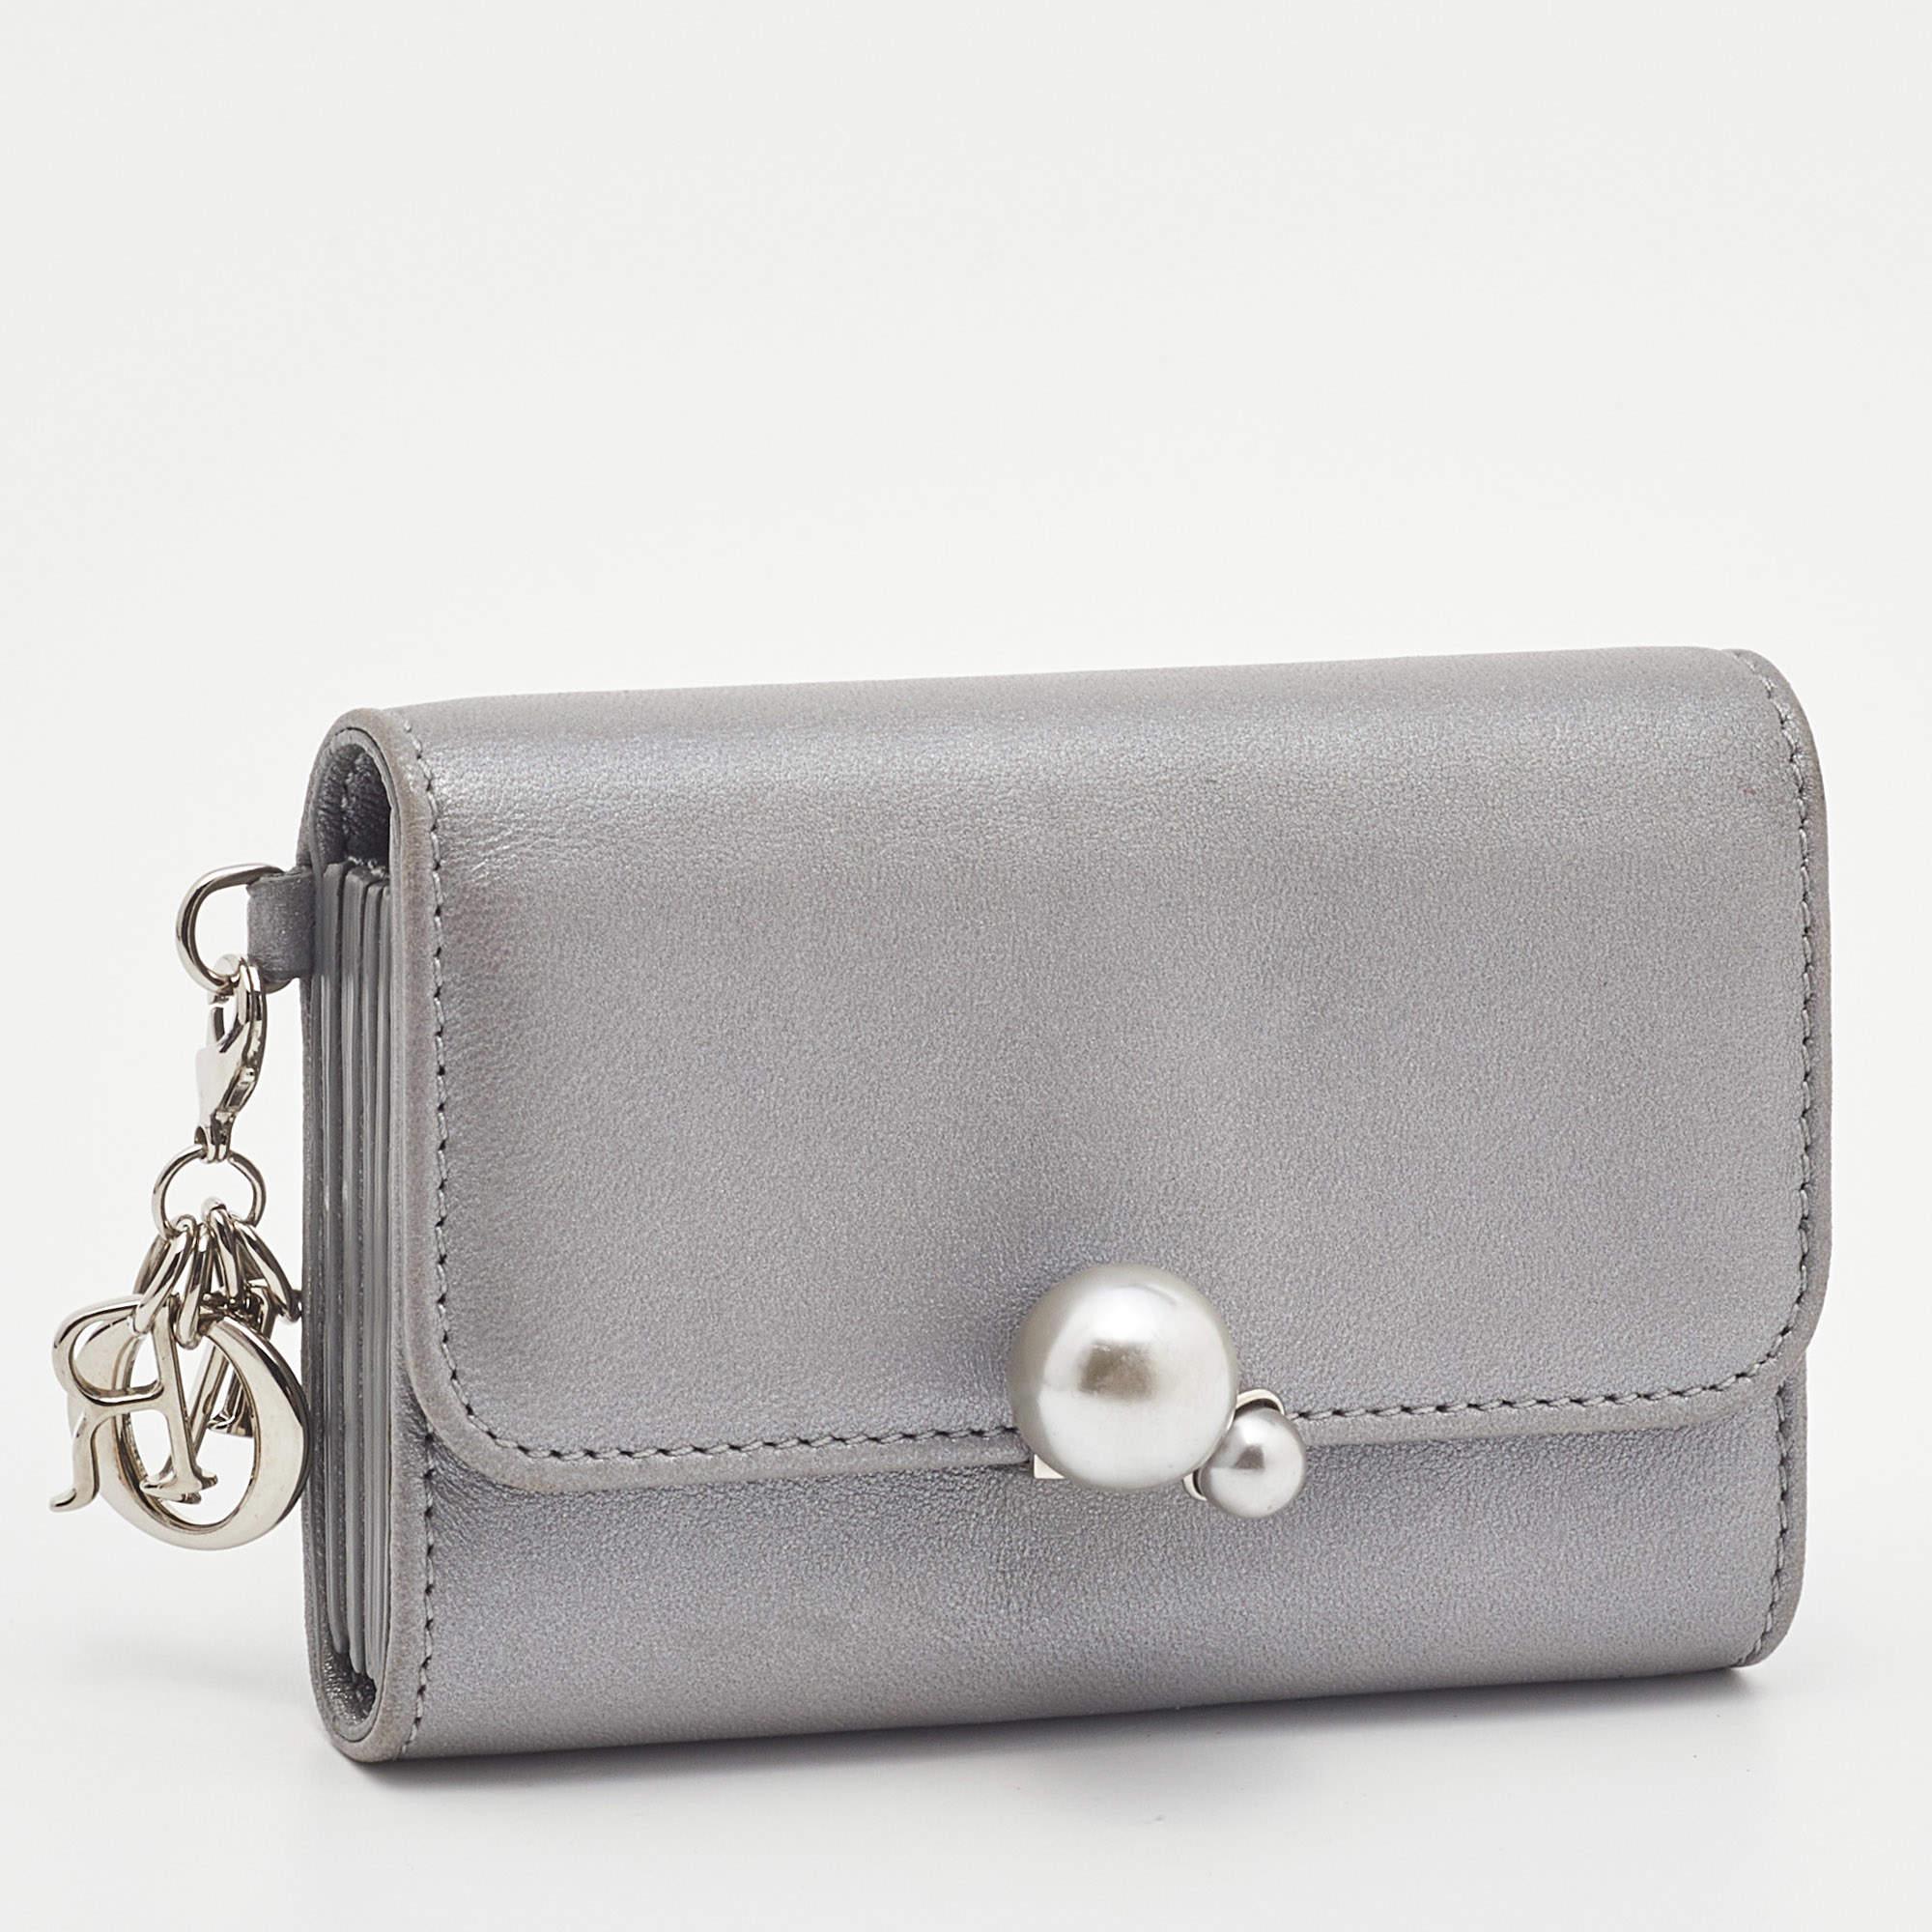 This stylish and functional card case from Dior makes for a great accessory. Crafted from quality leather in Italy, it carries a grey hue and silver-tone hardware . It has multiple card slots and classic Dior letter charms.


Includes
Original